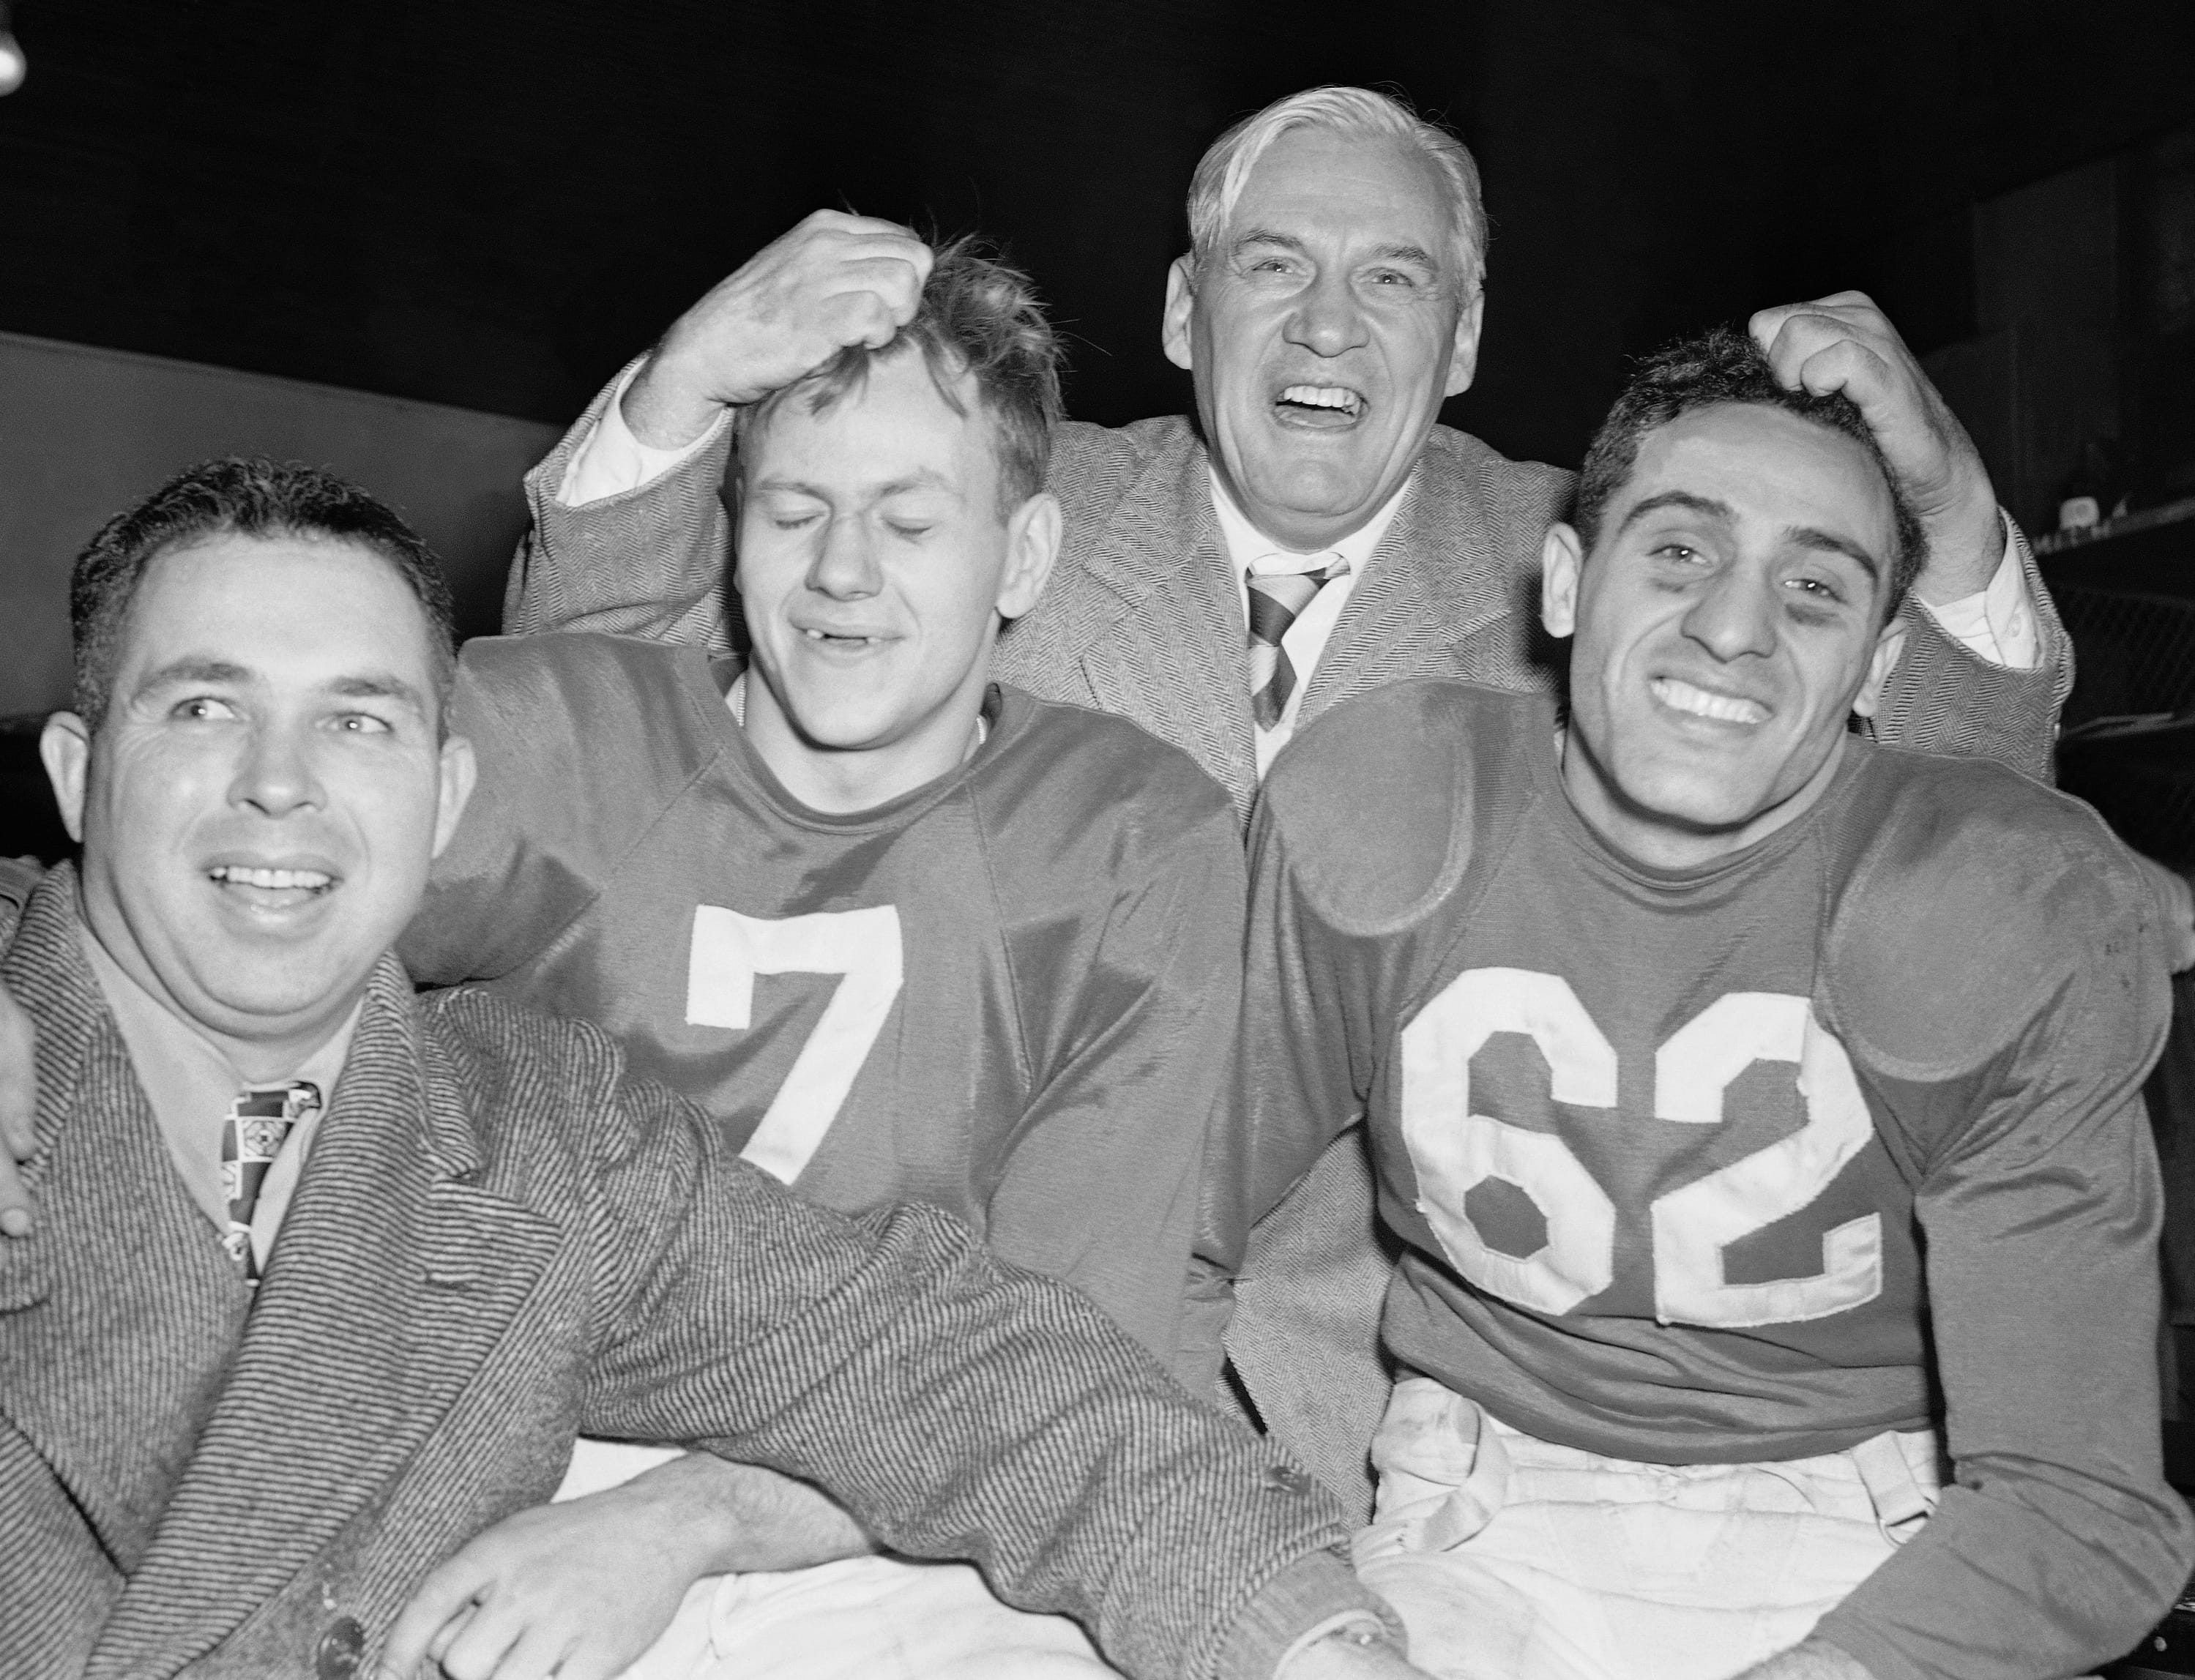 Chicago Cardinals coach Jimmy Conzelman, center, celebrates with assistant coach Phil Handler and running backs Charley Trippi and Elmer Angsman after beating the Philadelphia Eagles in the 1947 NFL title game.